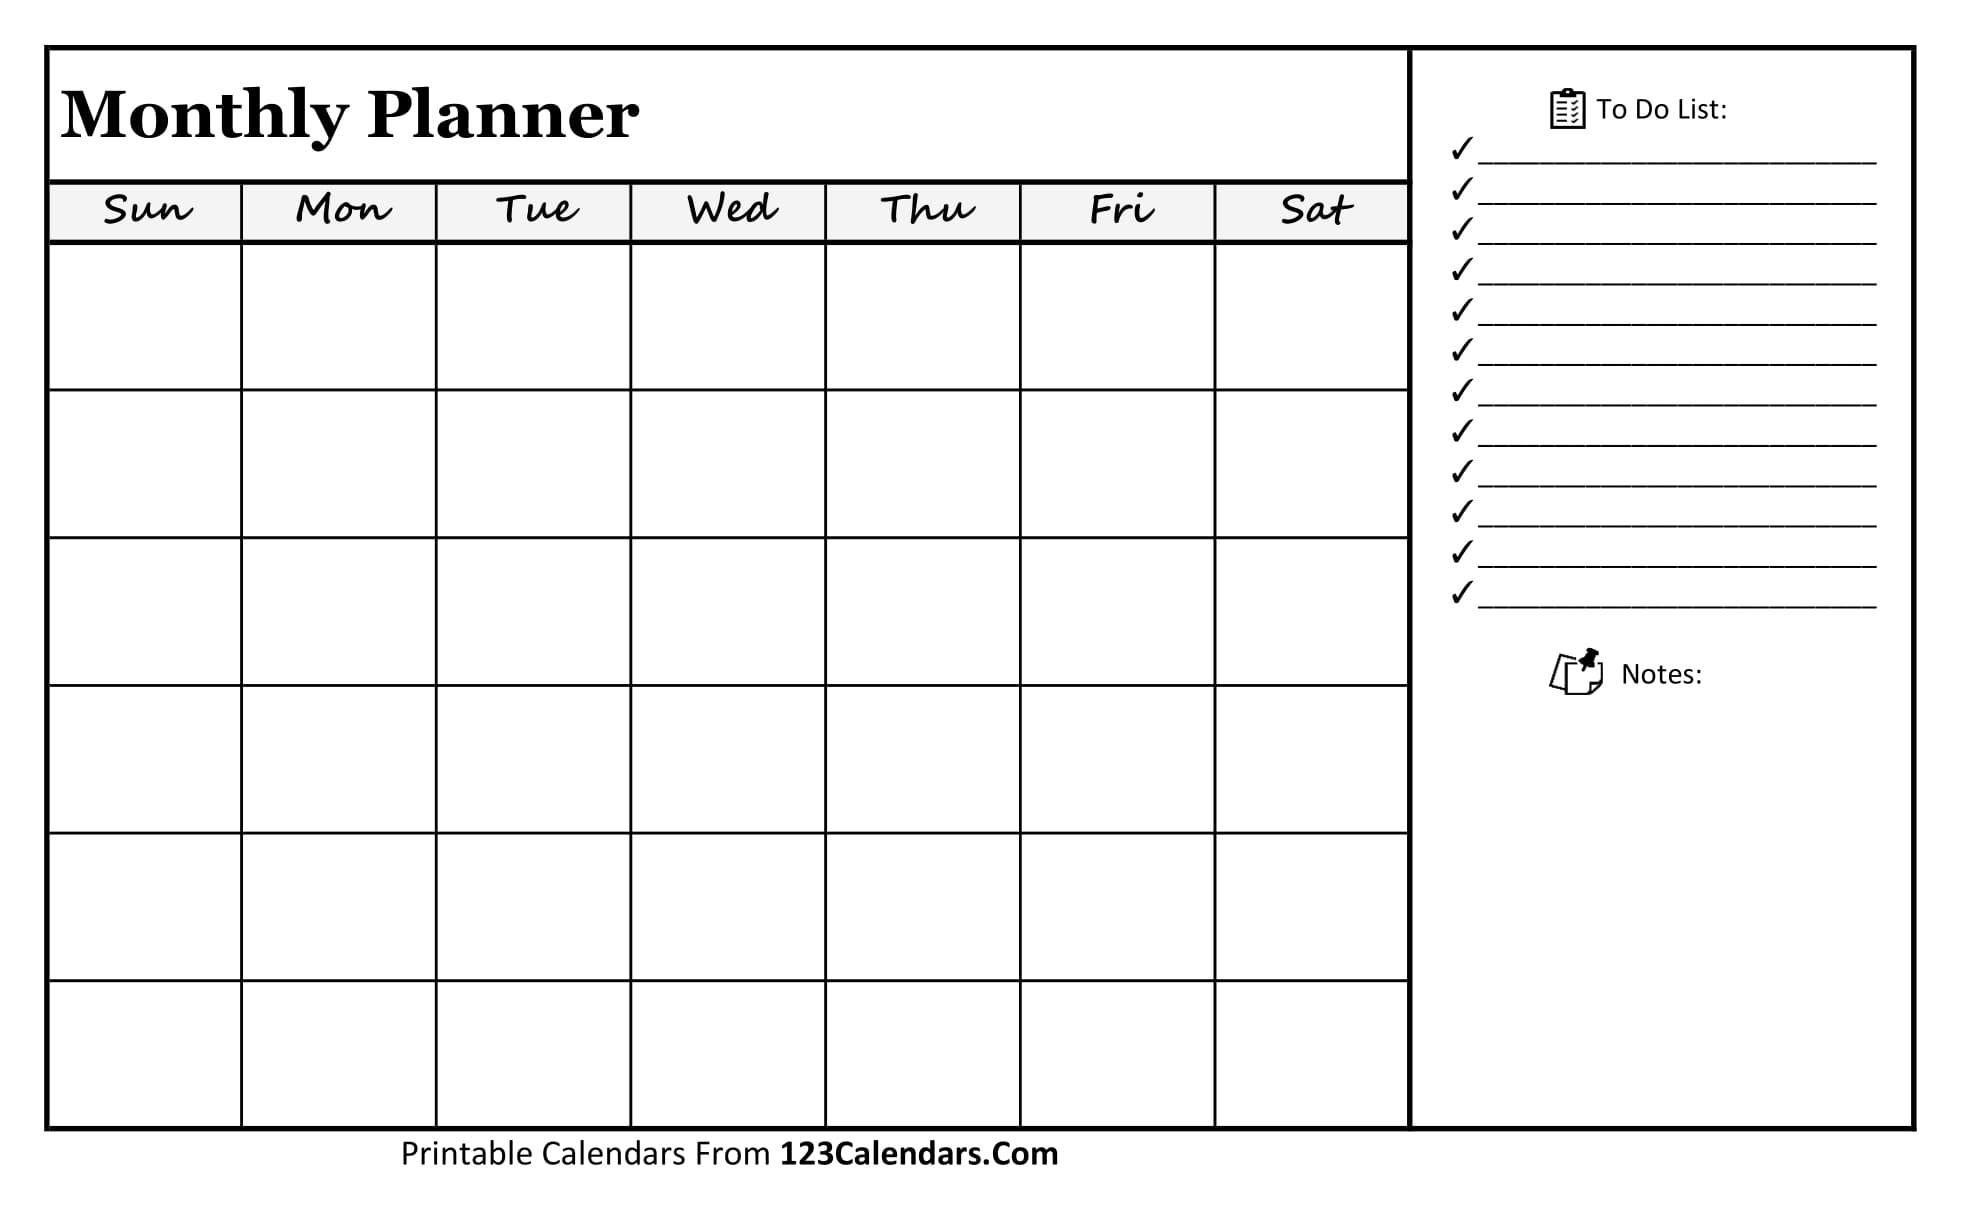 Printable Monthly Planner Templates 123Calendars